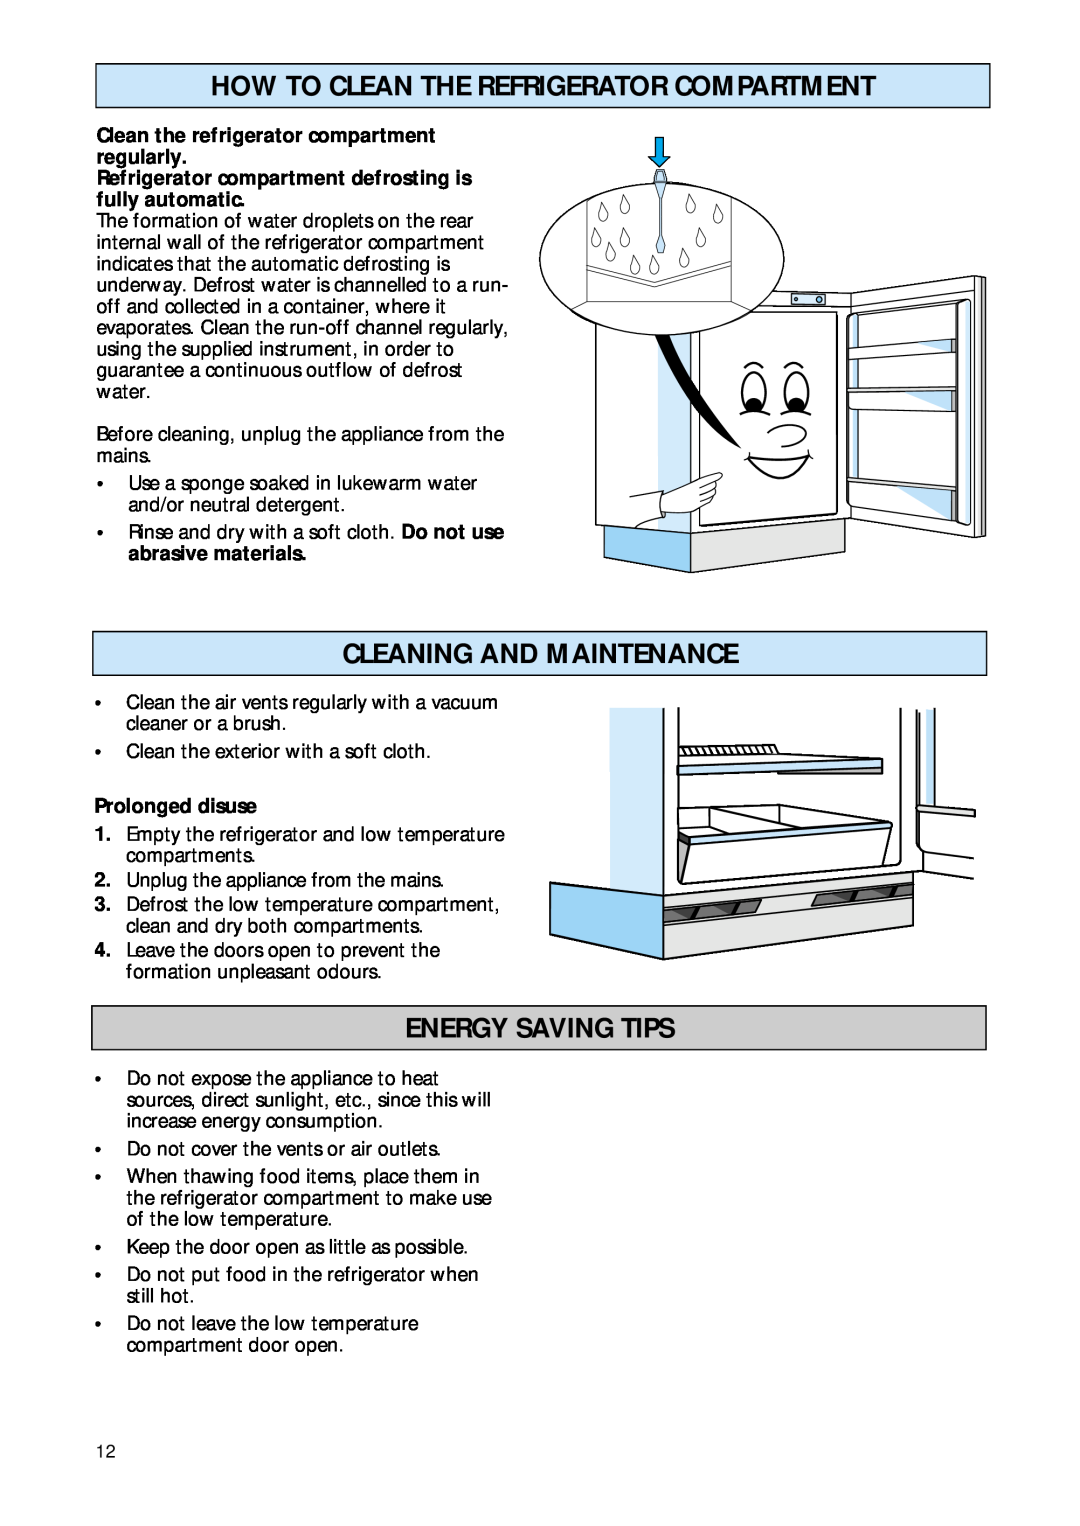 Smeg FR132A manual How To Clean The Refrigerator Compartment, Cleaning And Maintenance, Energy Saving Tips 